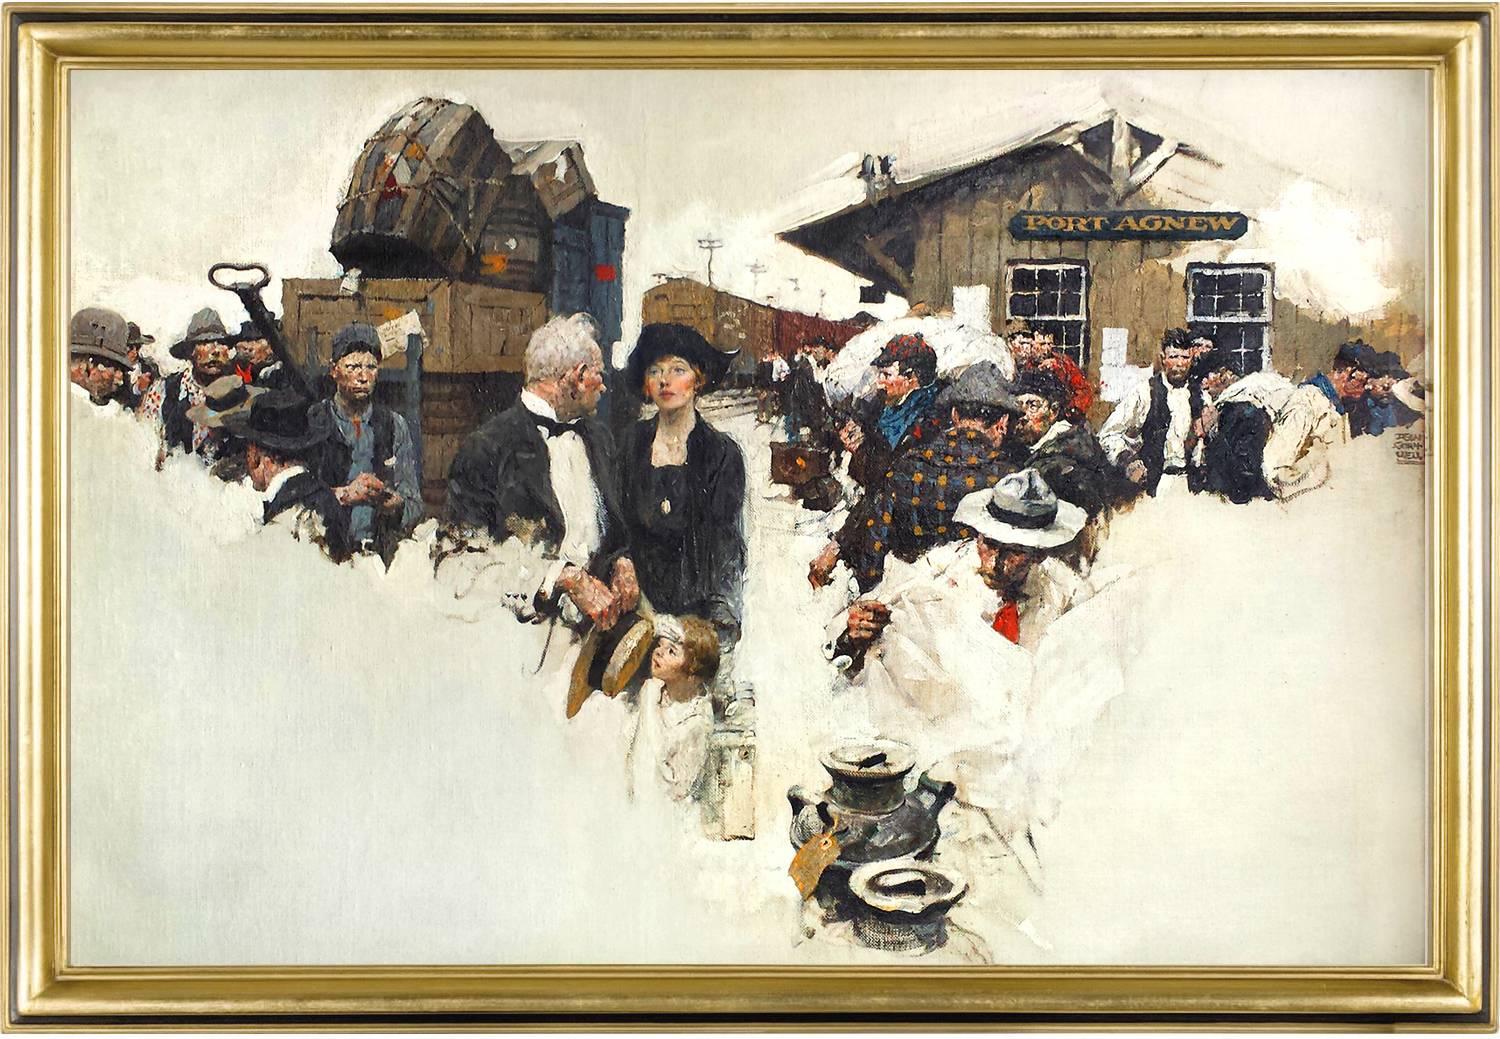 Dean Cornwell Portrait Painting – Kindred of the Dust, Frontier Town Cosmopolitan Magazine